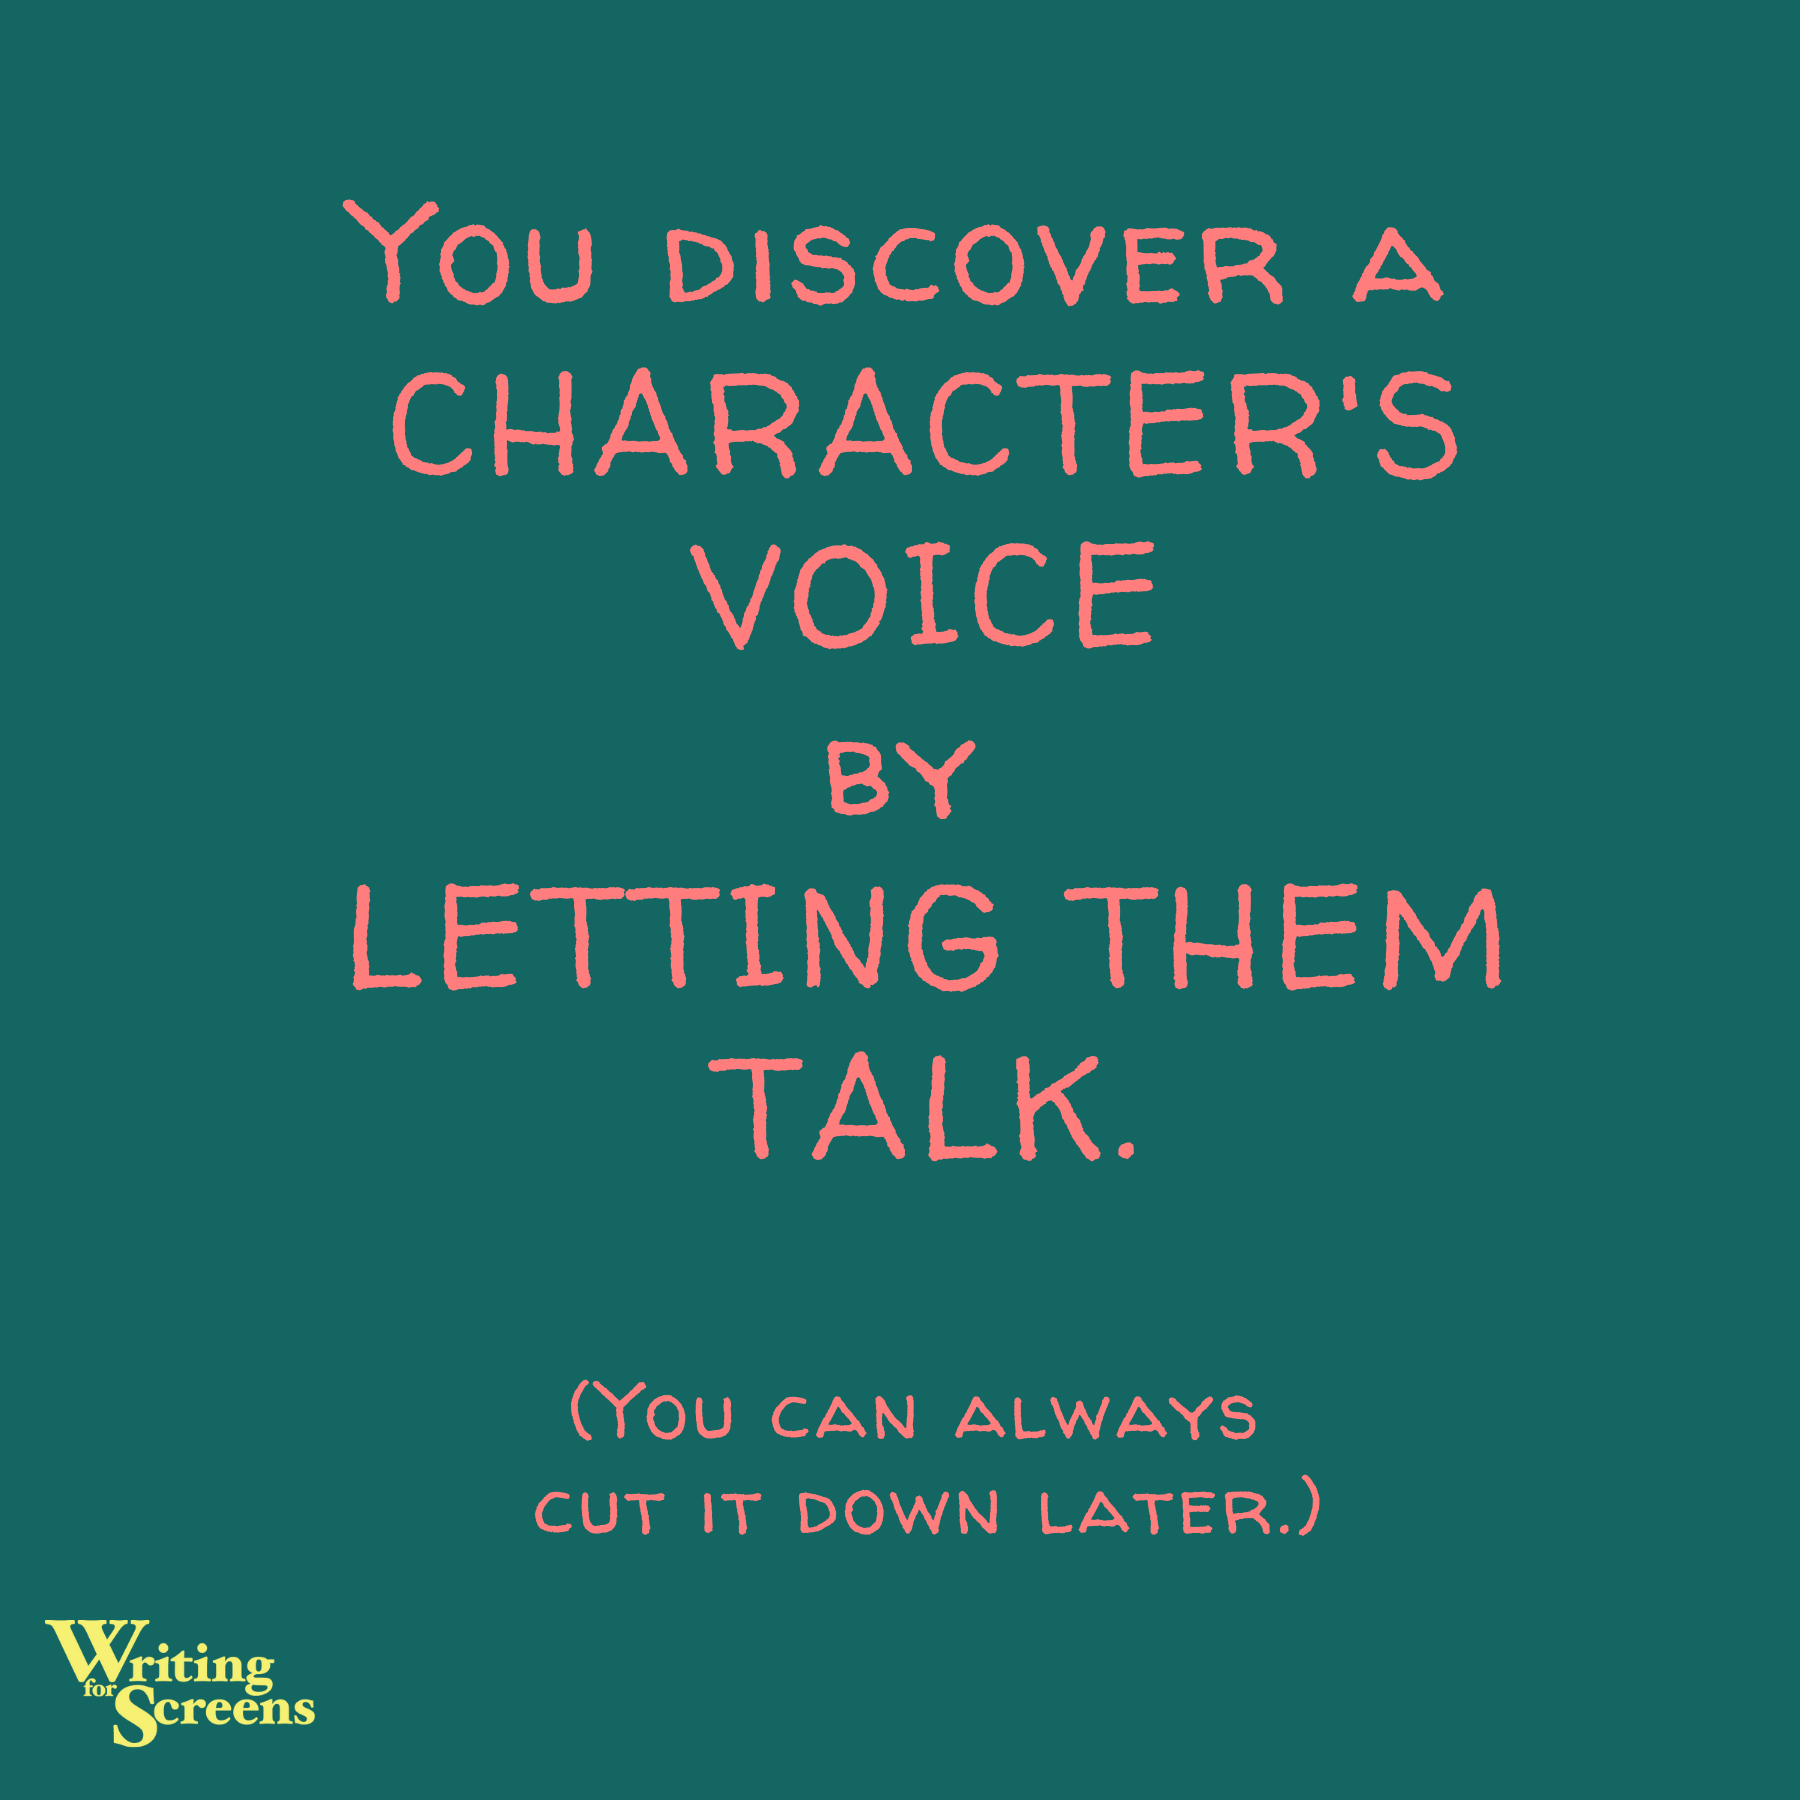 Finding A Character’s Voice